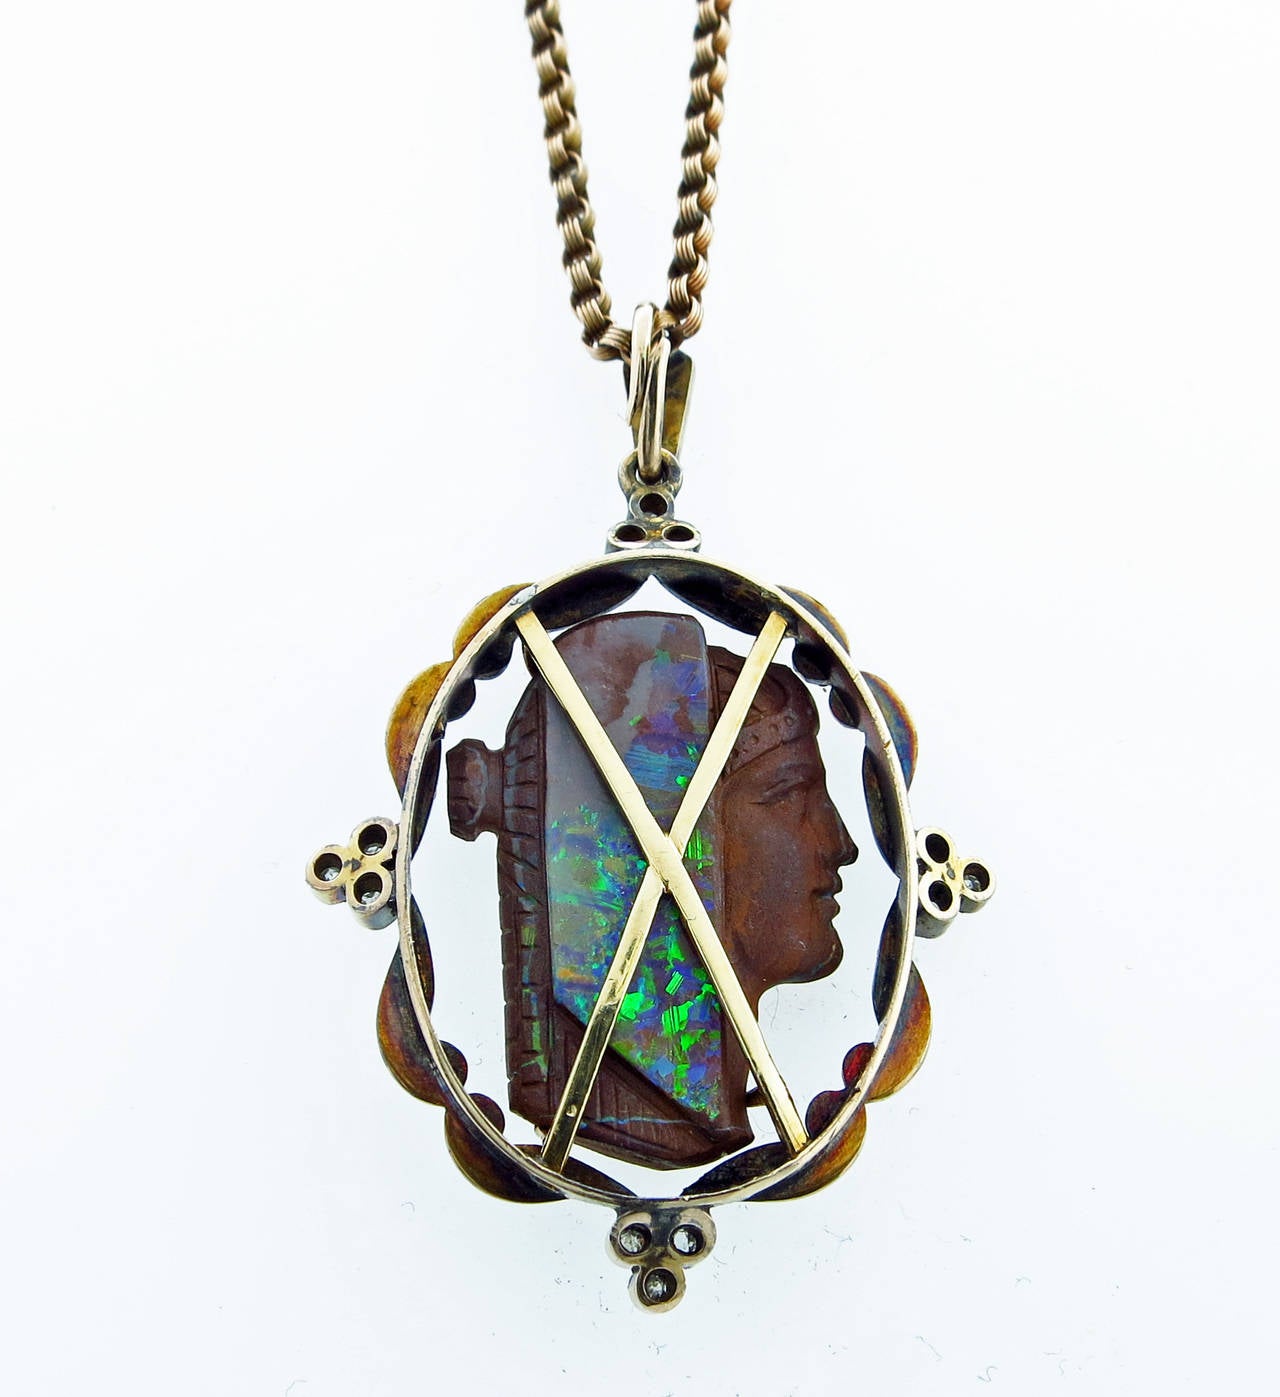 A work of art in carved boulder opal cameo, the antique pendant is finely detailed on both sides and measures 1 3/4